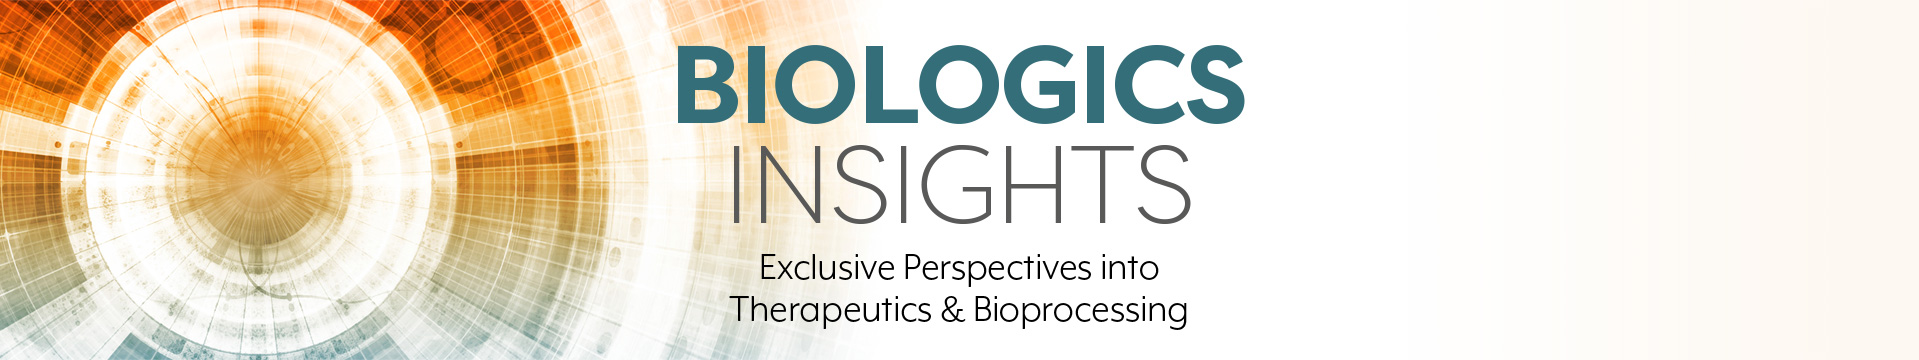 Biologics Insights - Exclusive Perspectives into Therapeutics and Bioprocessing